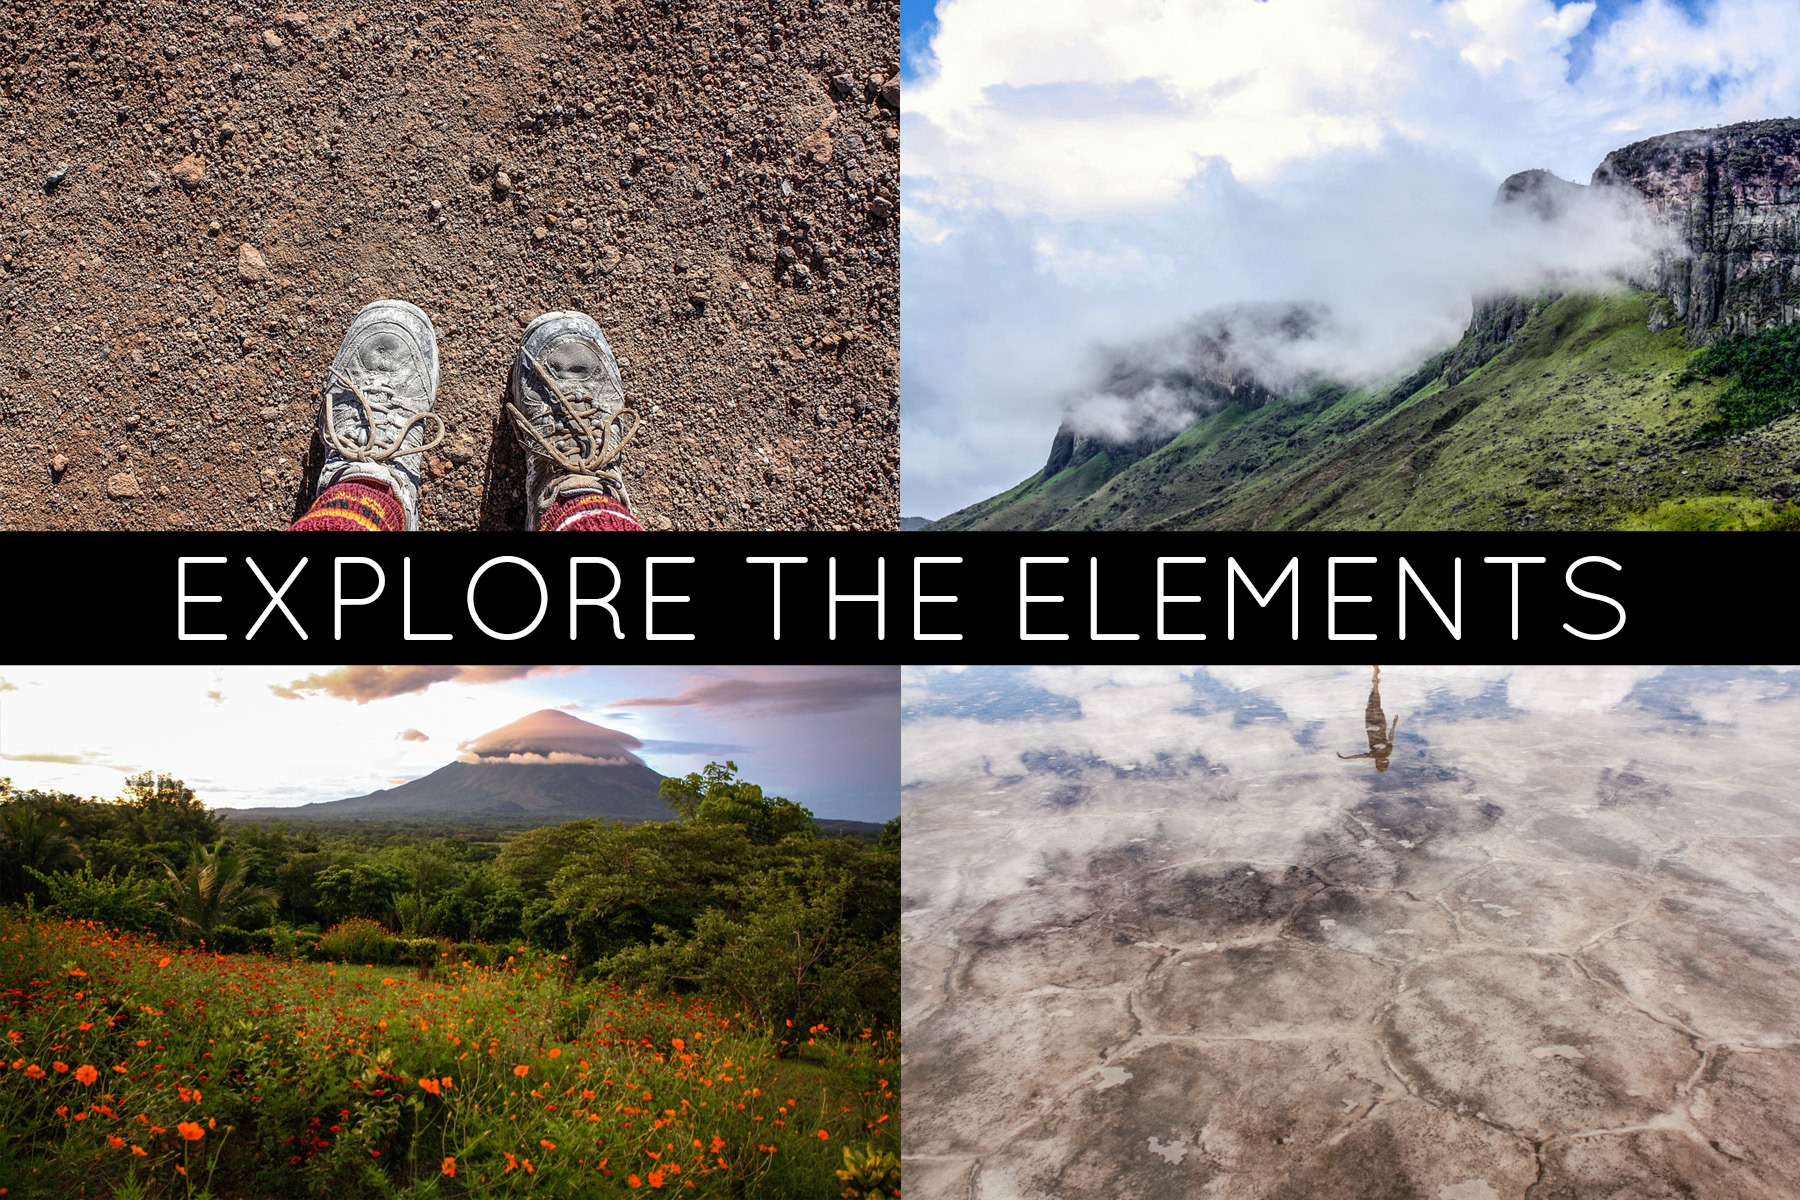 Explore the Elements contest by Thomas Cook